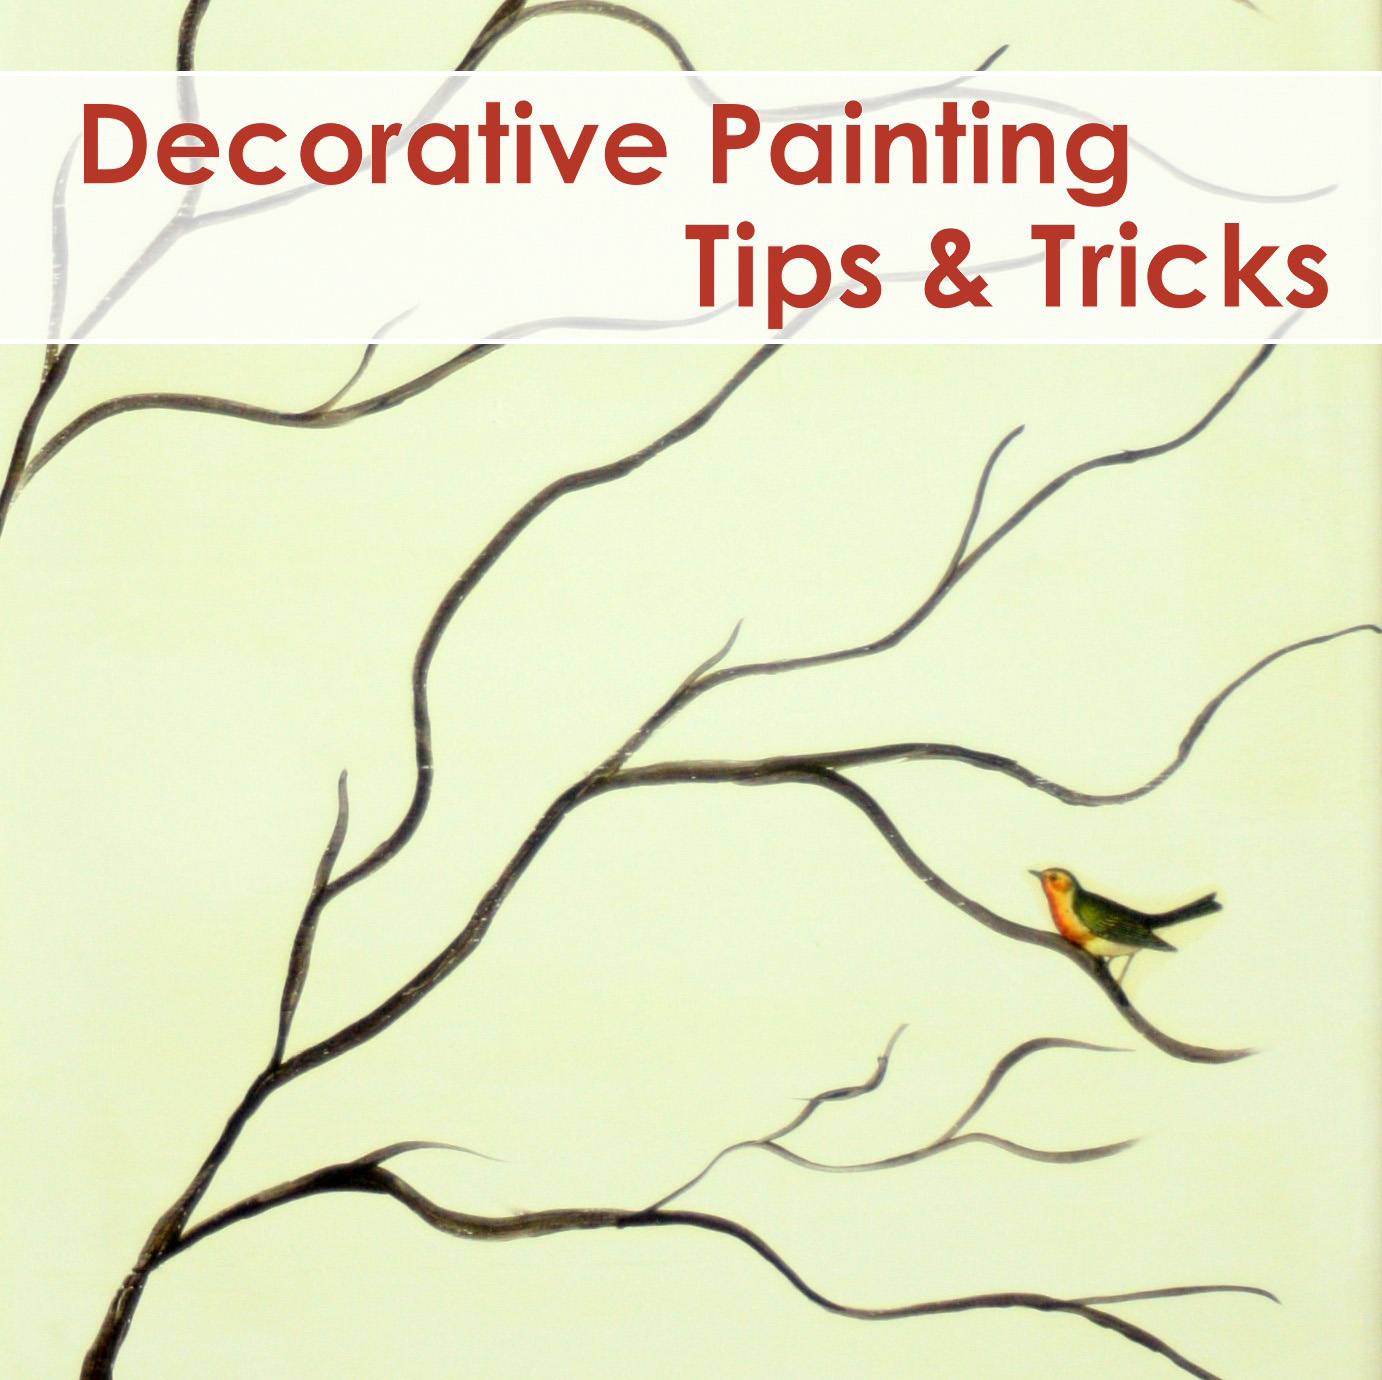 Decorative Painting Tutorial with branches and birds Pinterest Graphic